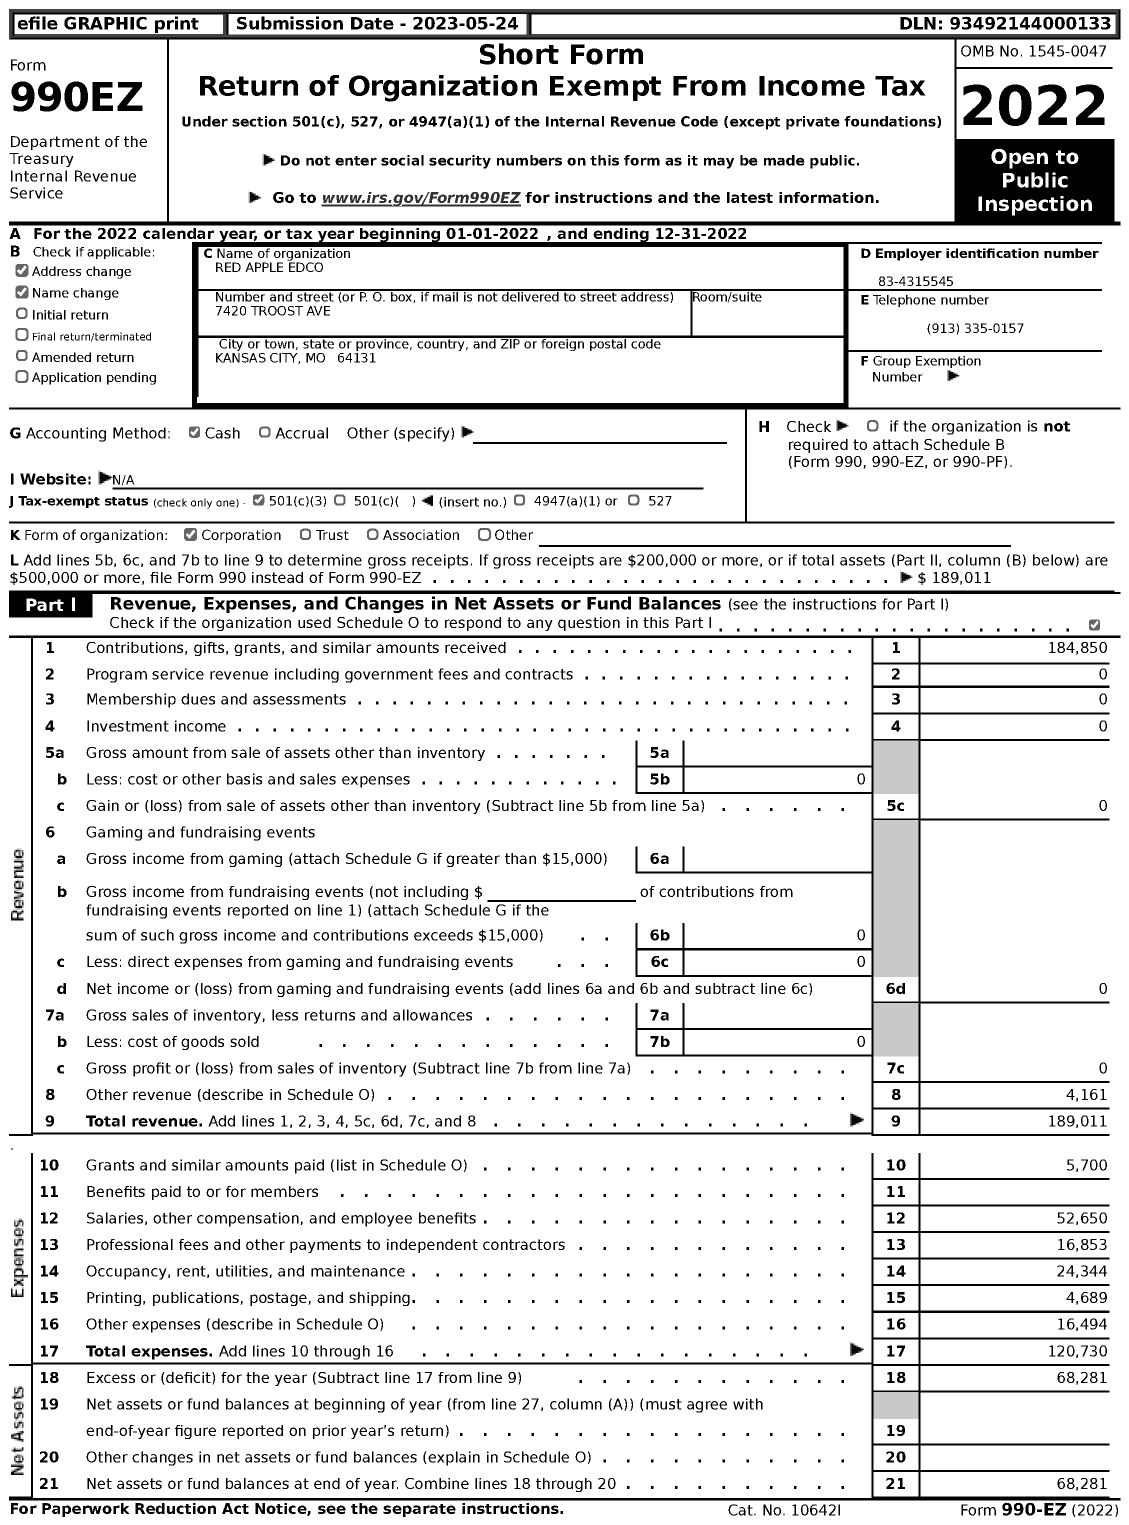 Image of first page of 2022 Form 990EZ for Red Apple Edco